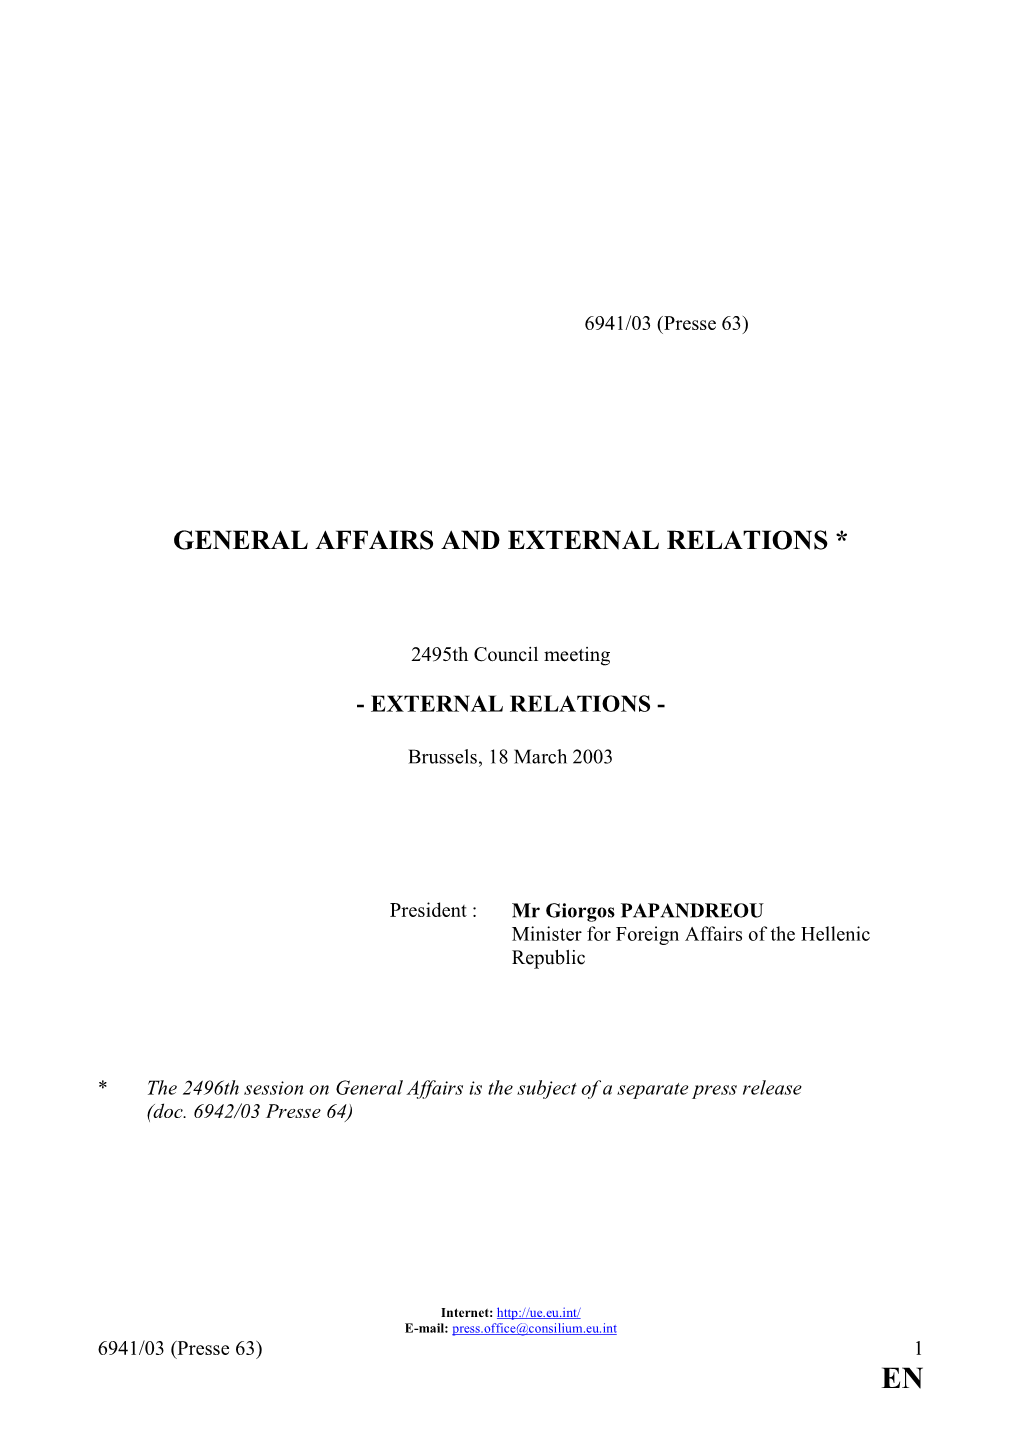 General Affairs and External Relations *